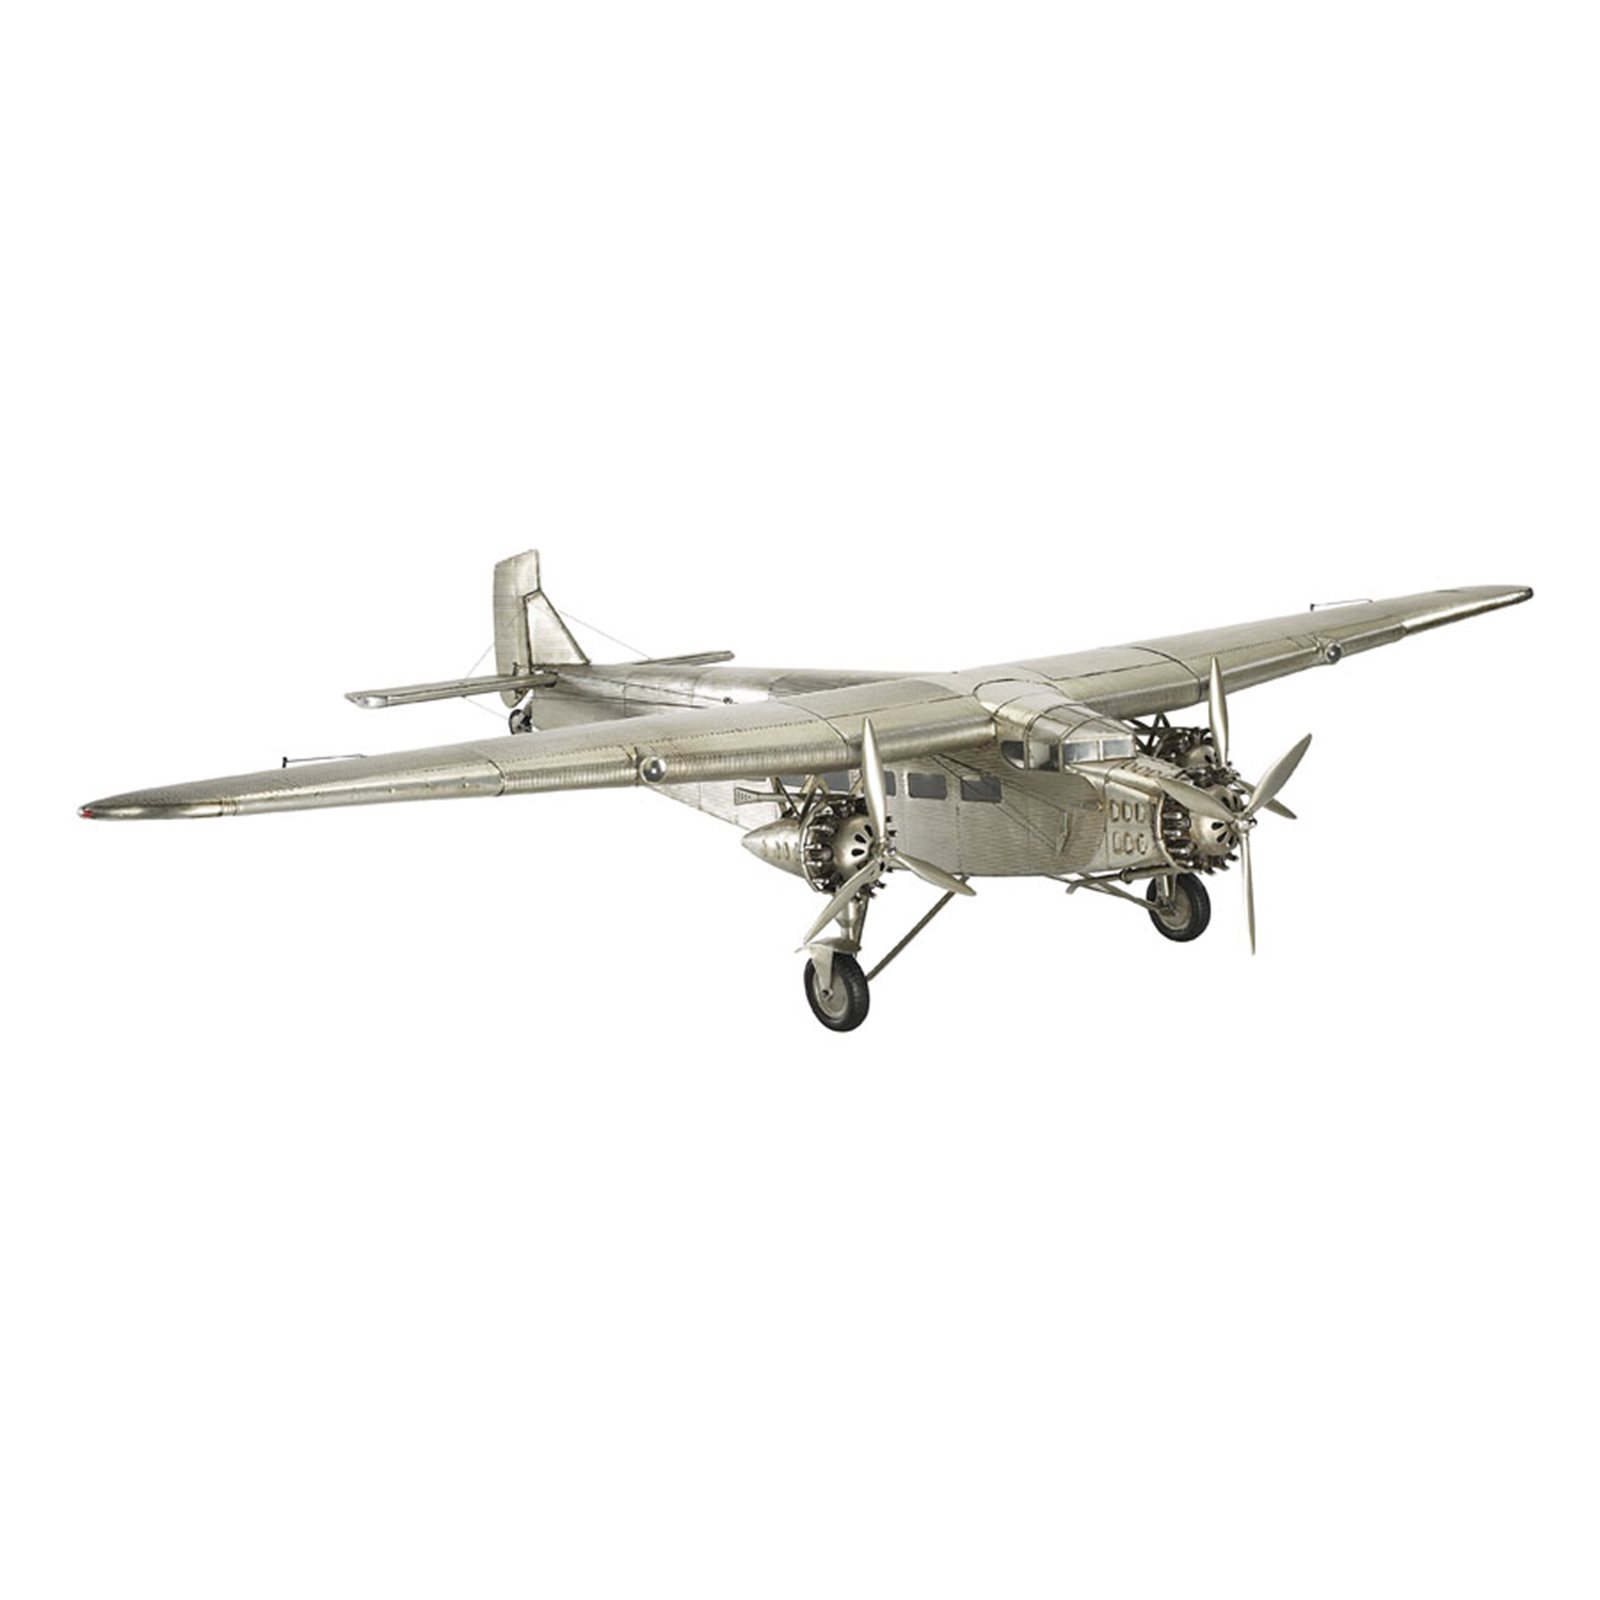 Authentic Model Ford Trimotor model Plane Image